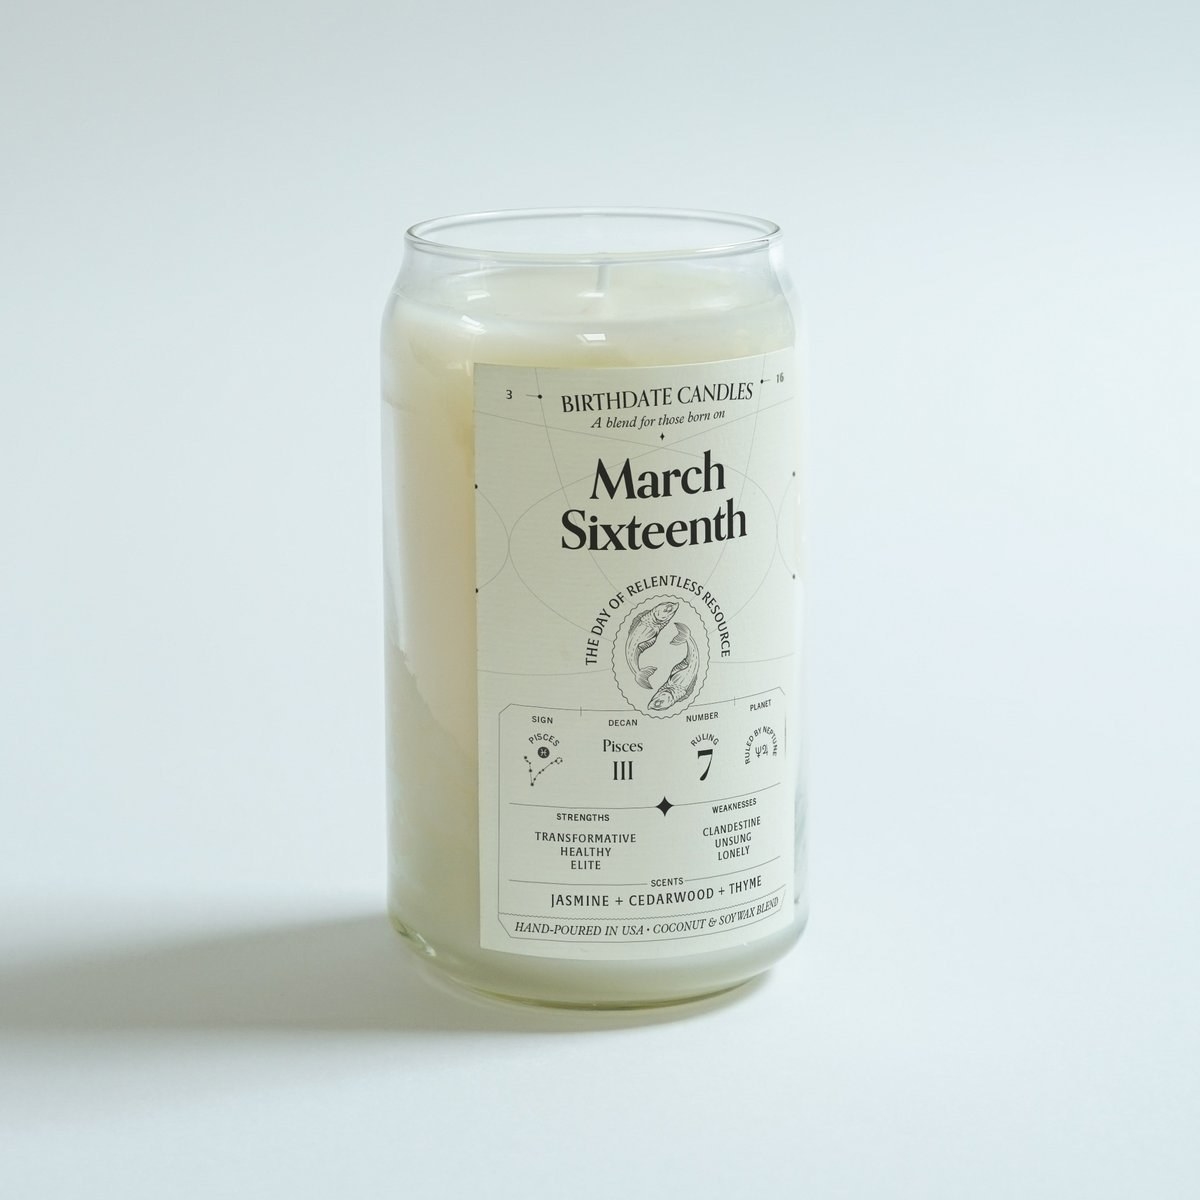 A hand-poured white candle in a jar with a label that says 